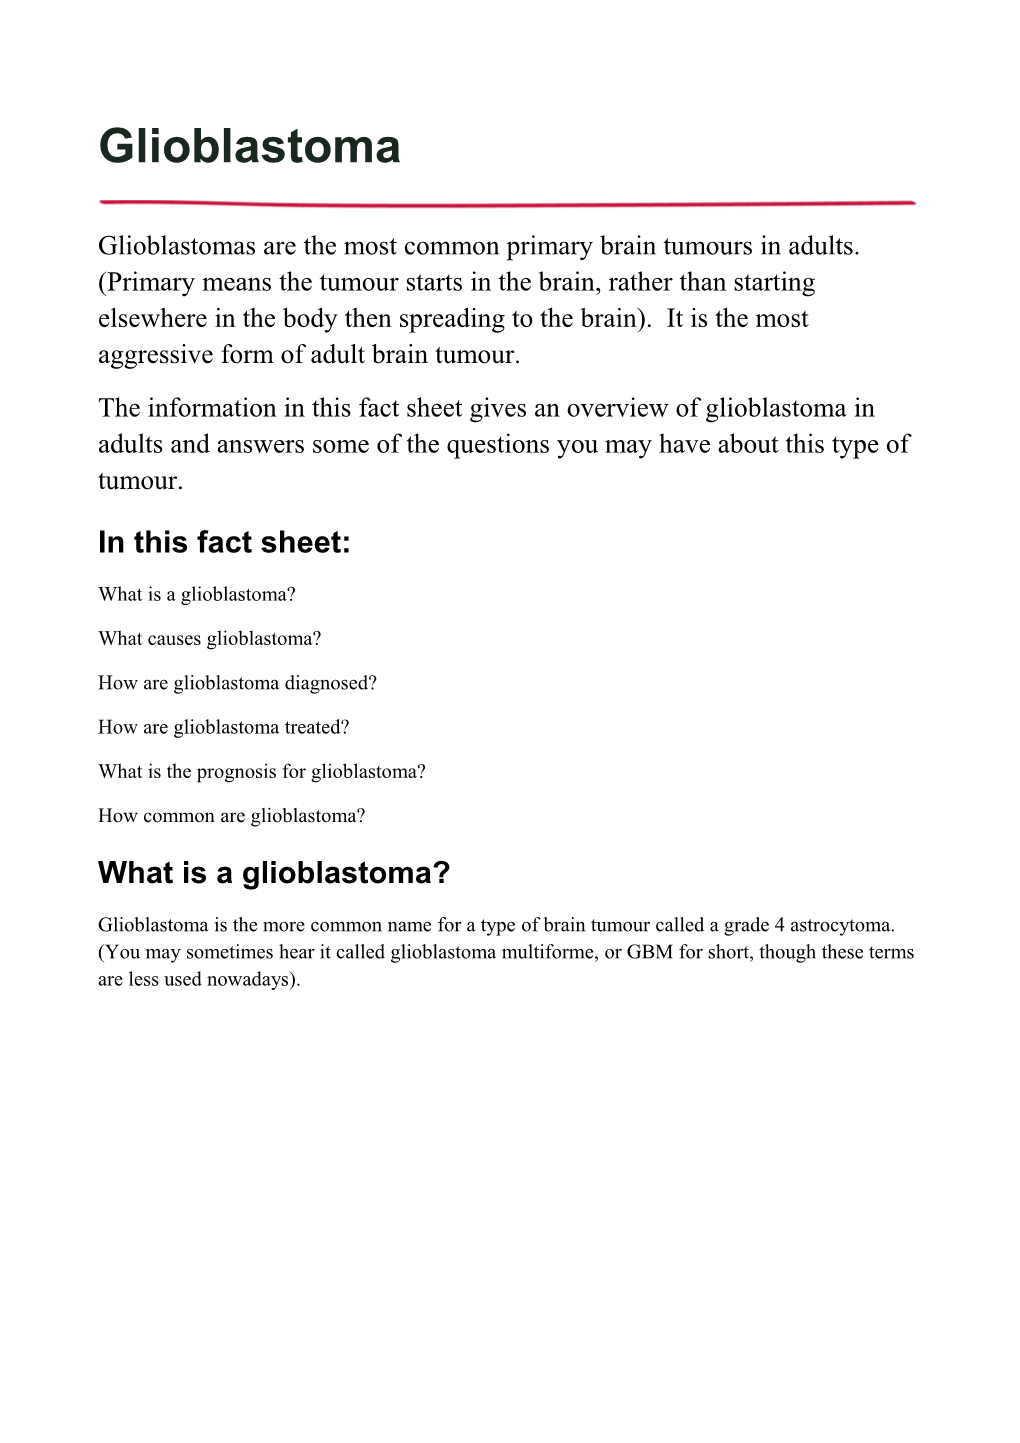 Glioblastomas Are the Most Common Primary Brain Tumours in Adults. (Primary Means the Tumour